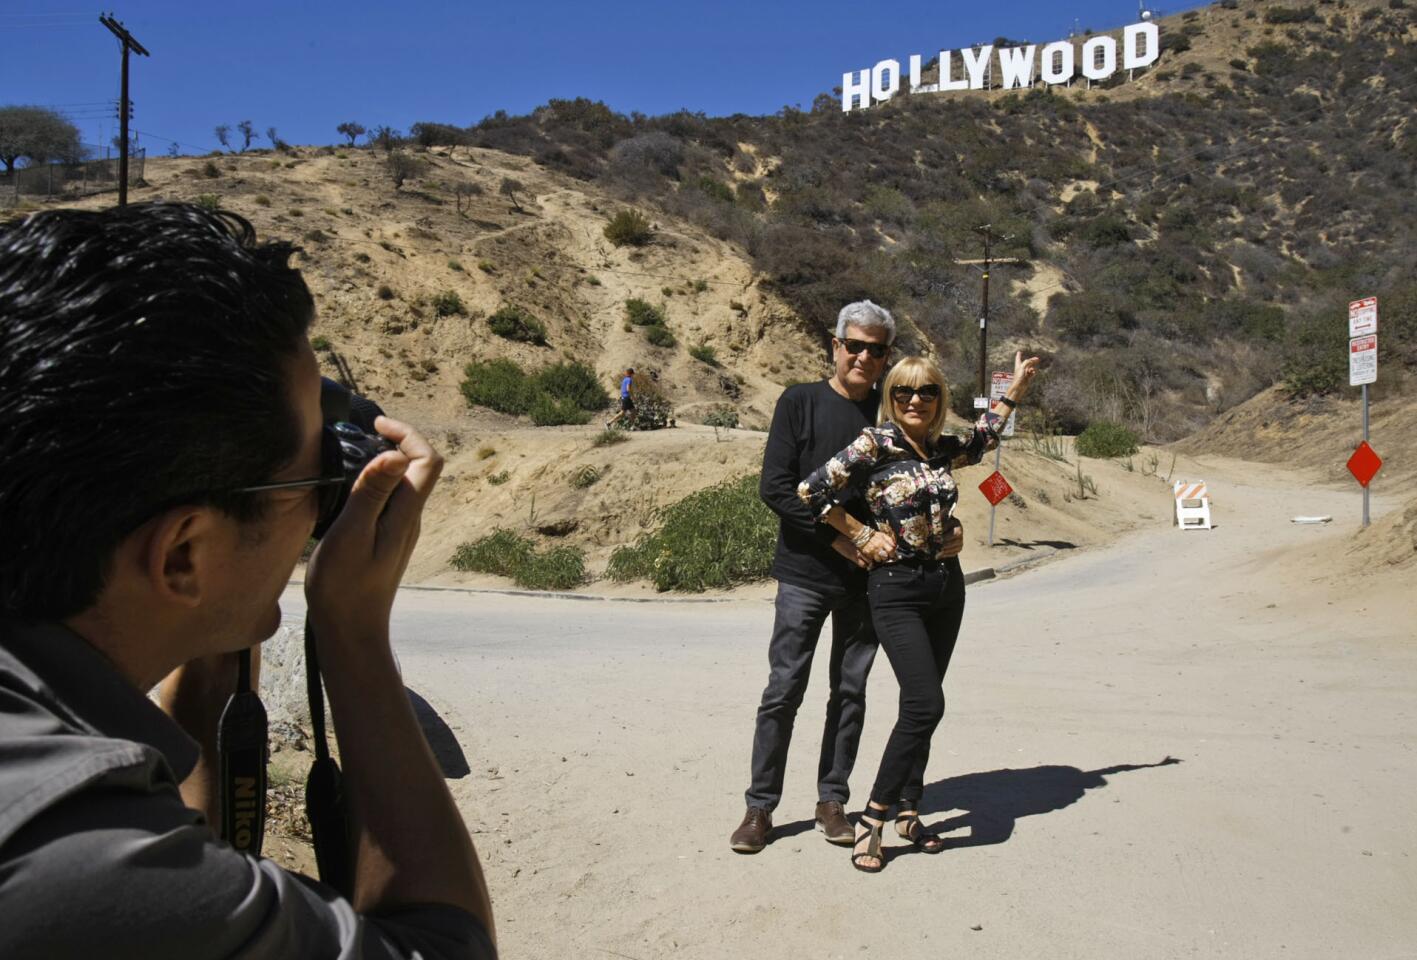 Tourists at Hollywood sign